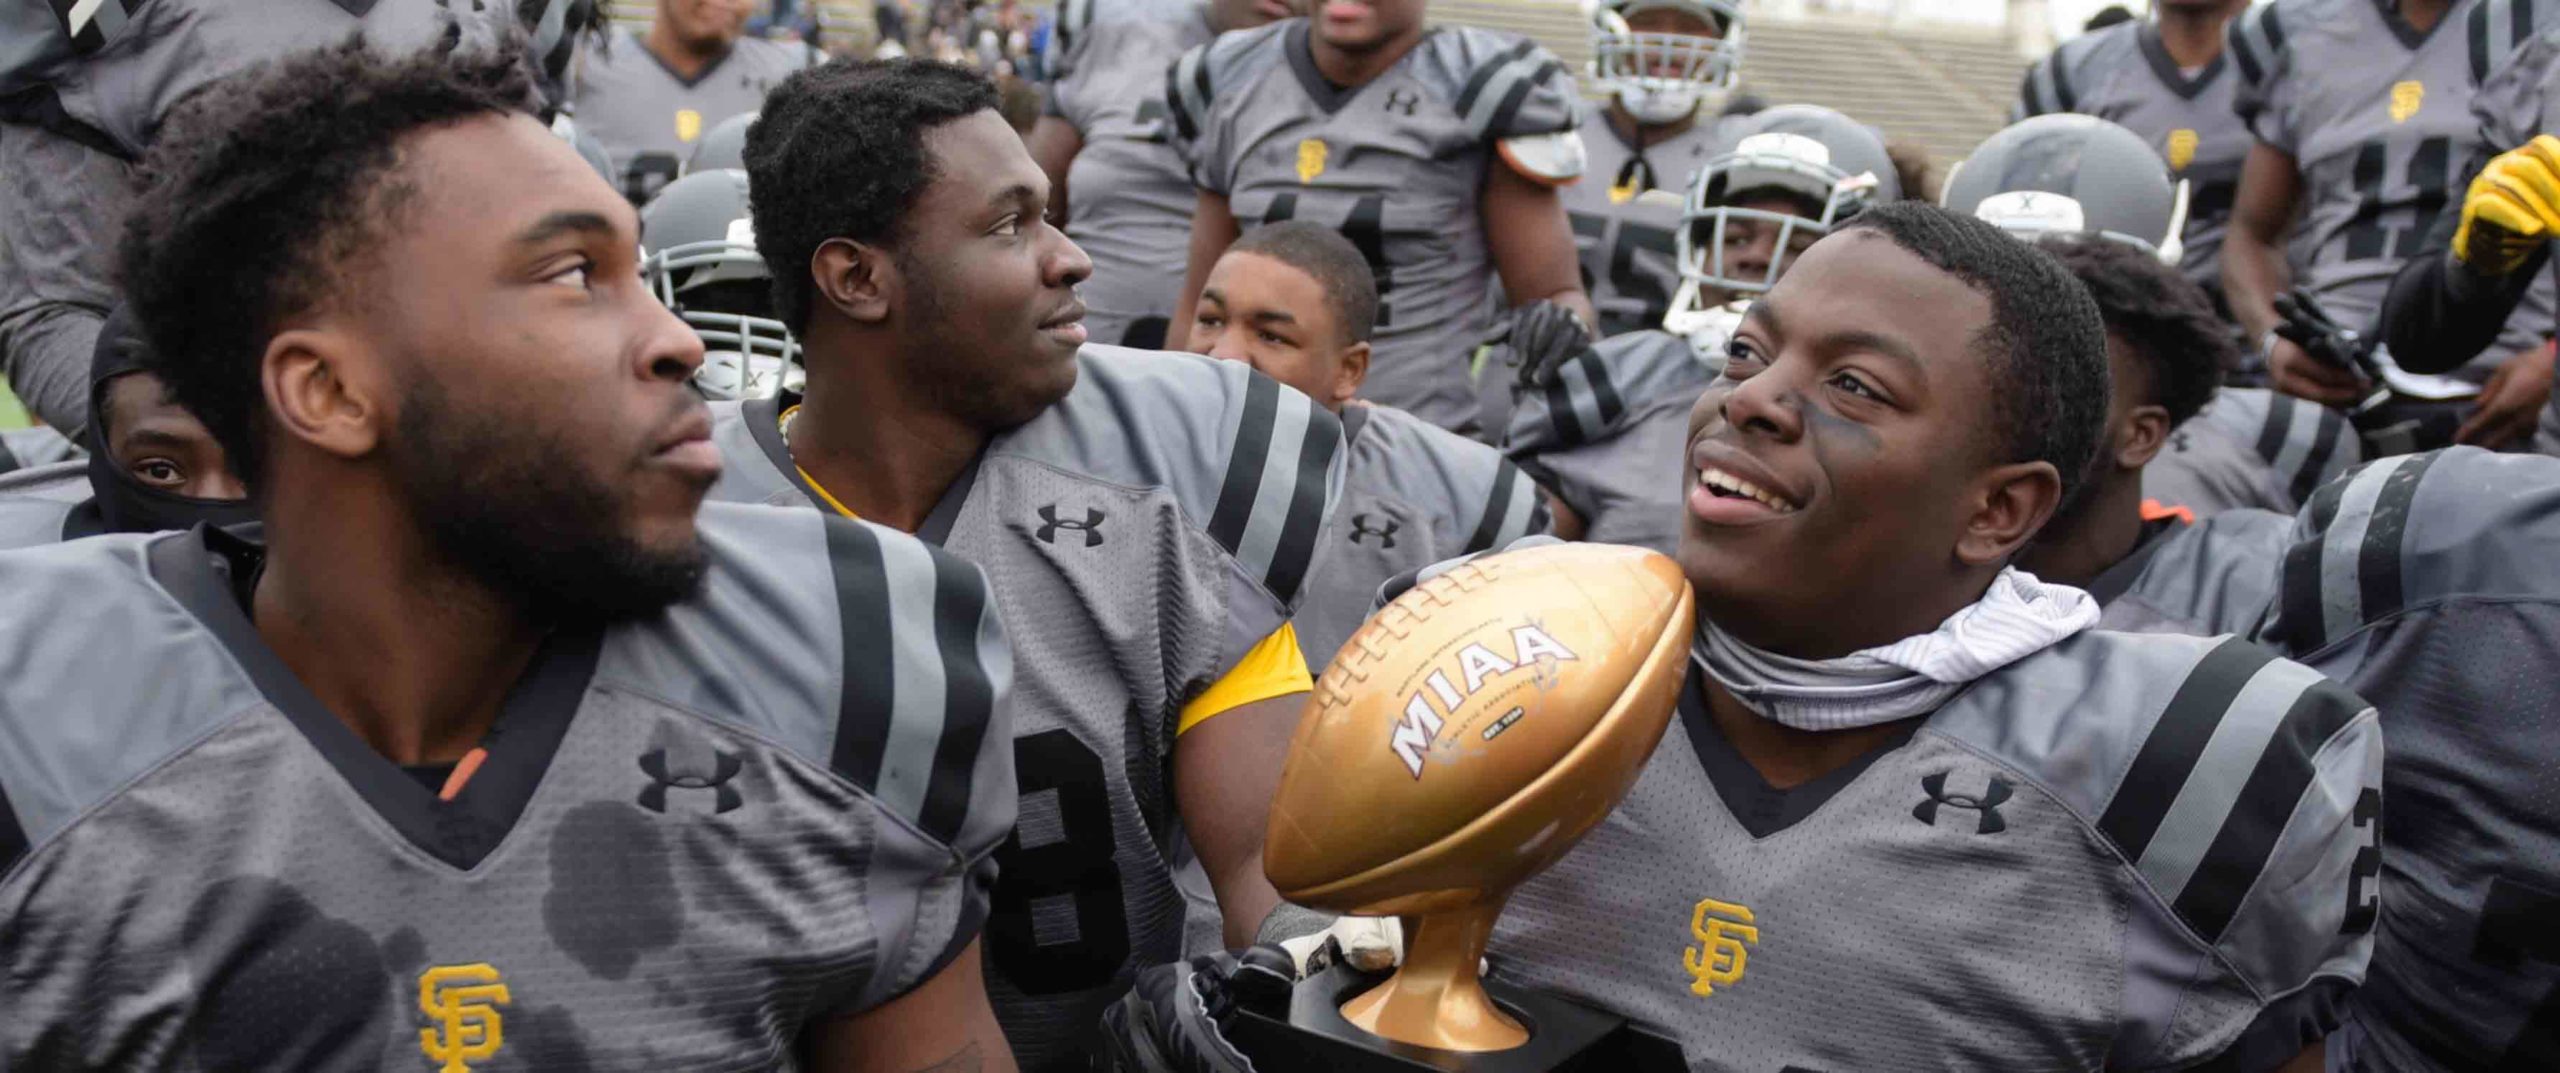 St. Frances Academy rolls to another A Conference football title